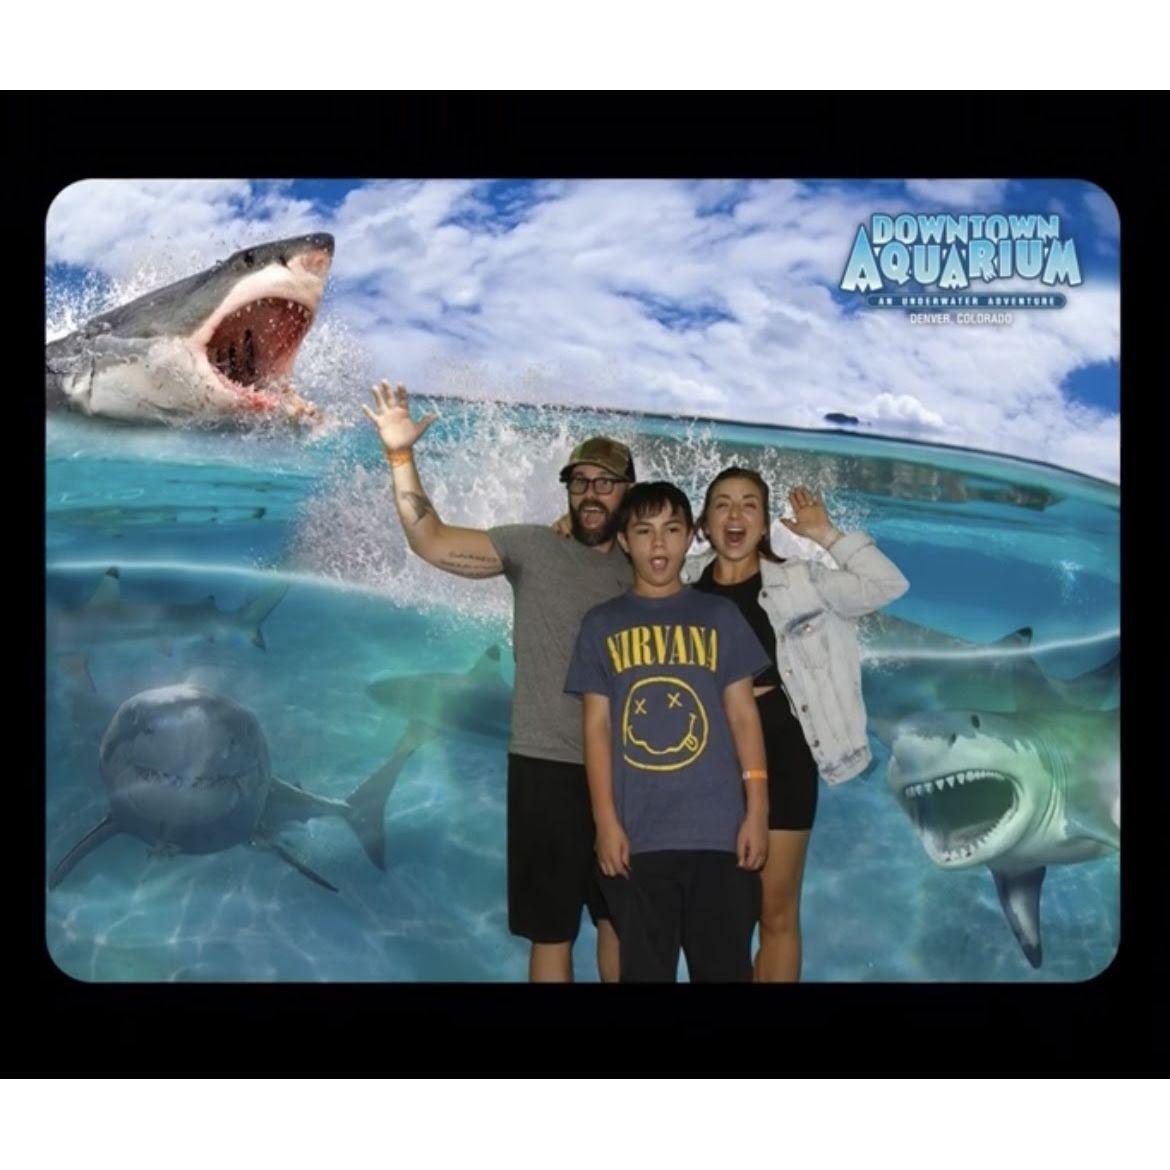 Trying to stay alive at the Denver Aquarium!